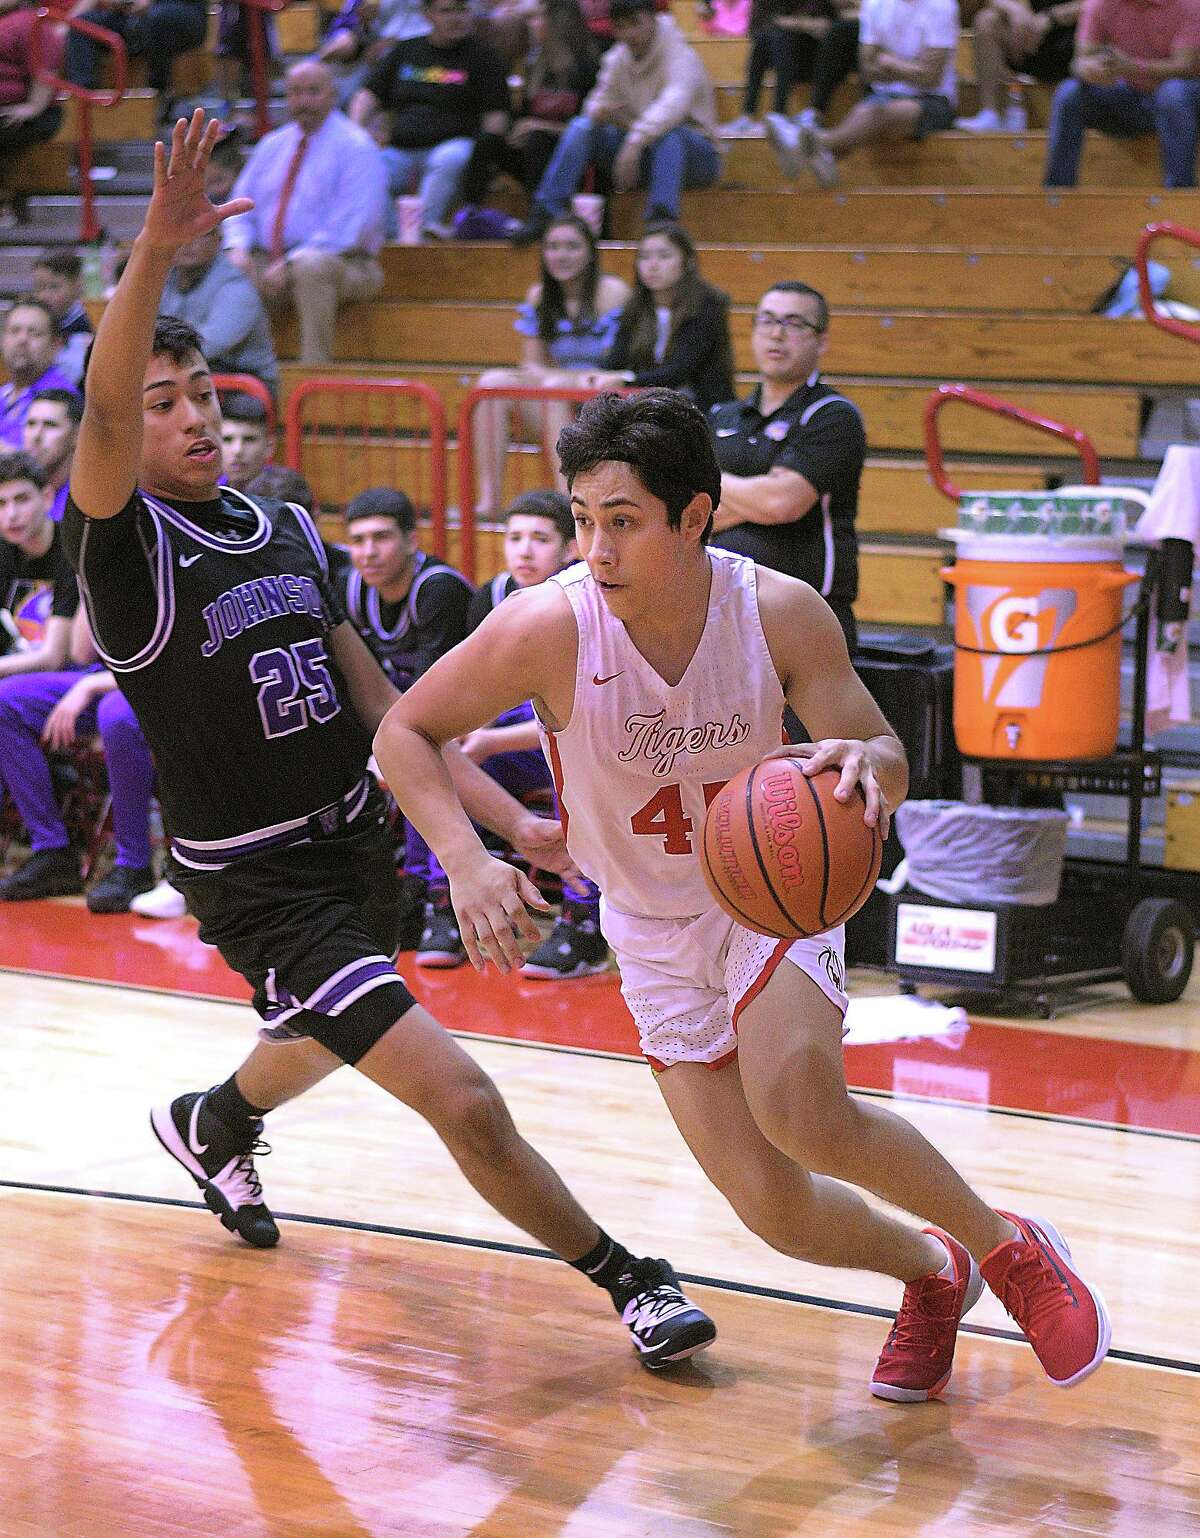 Martin’s Nelson Vasquez is averaging 28.4 points and 5.4 rebounds per game this season. Vasquez opened the year with a 45-point performance against Corpus Christi Moody.